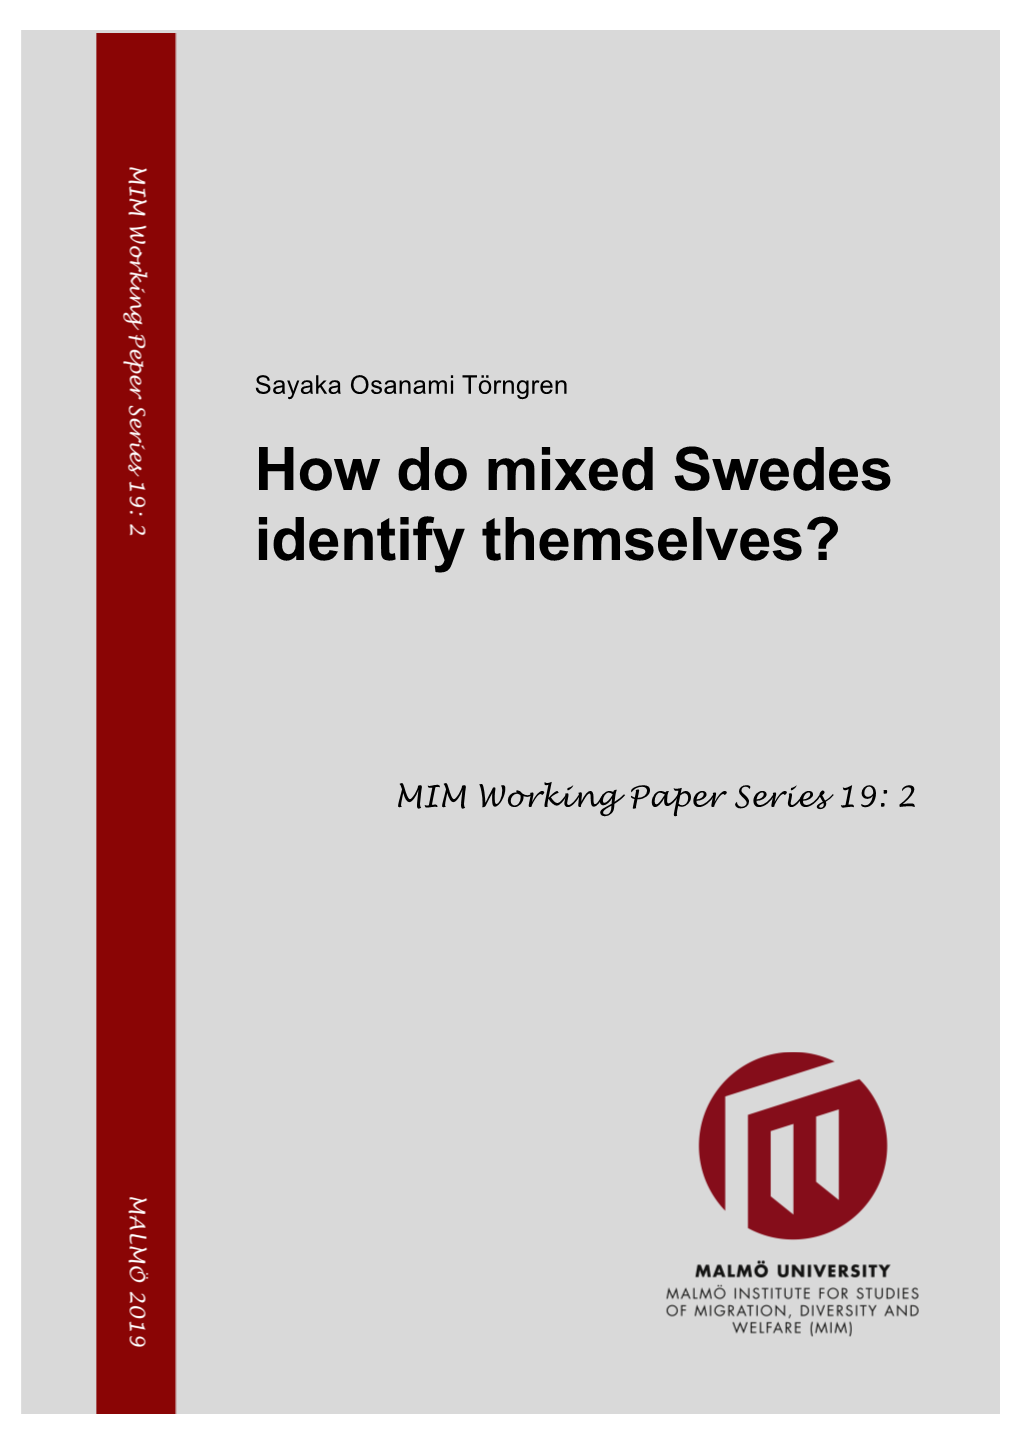 How Do Mixed Swedes Identify Themselves?